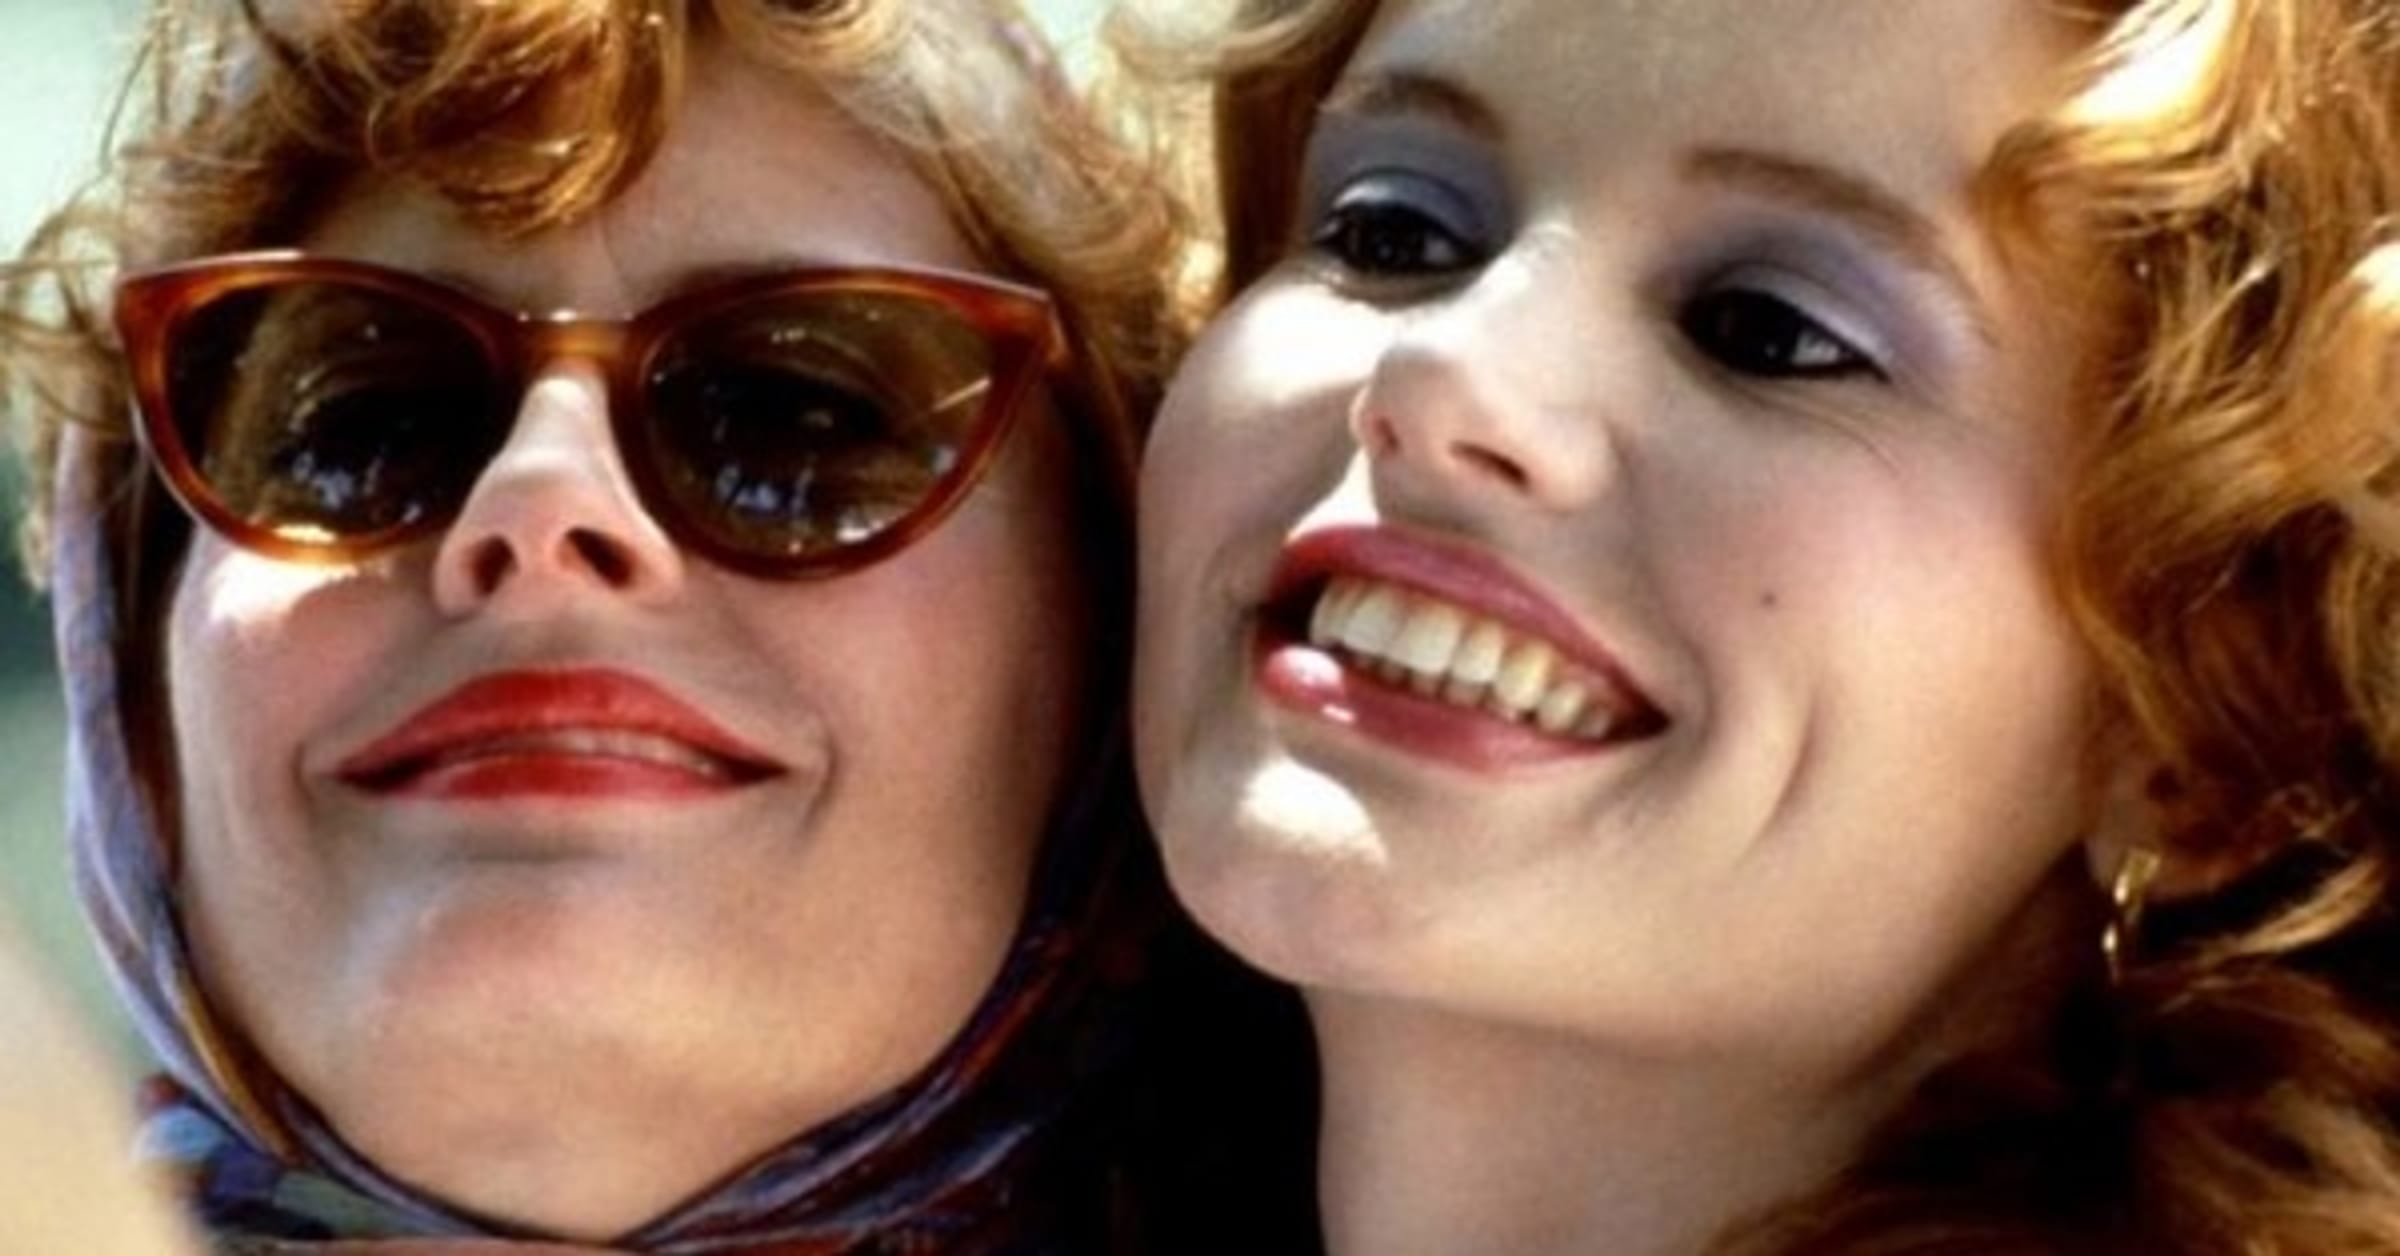 The All-Natural Look of Two Mythical Creatures: Thelma and Louise